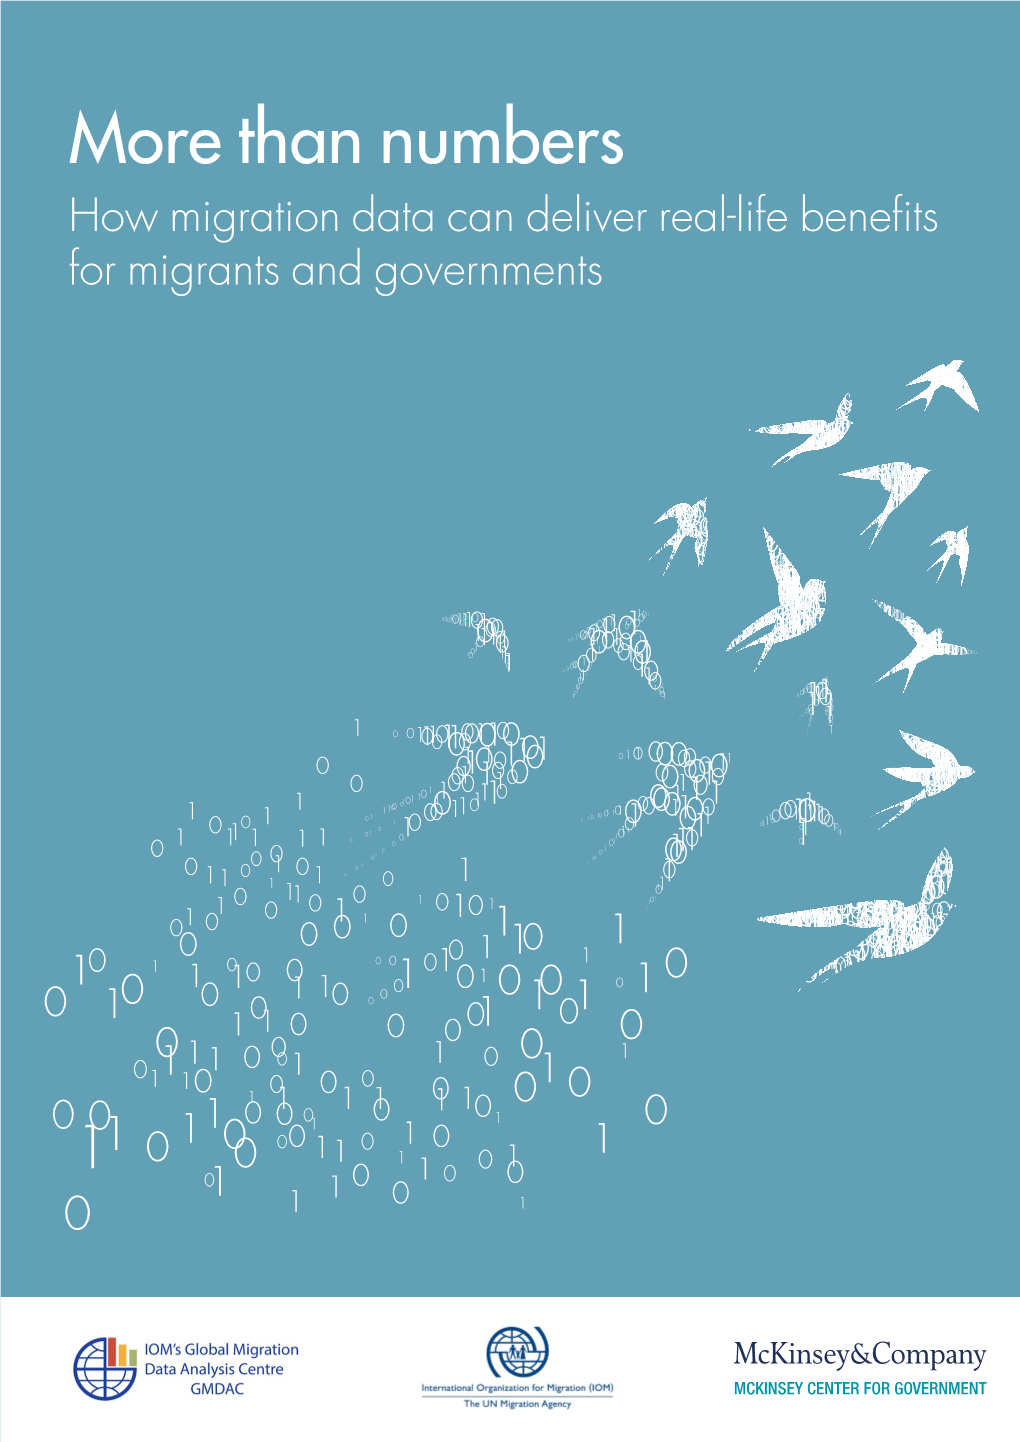 More Than Numbers: How Migration Data Can Deliver Real-Life Benefits for Migrants and Governments